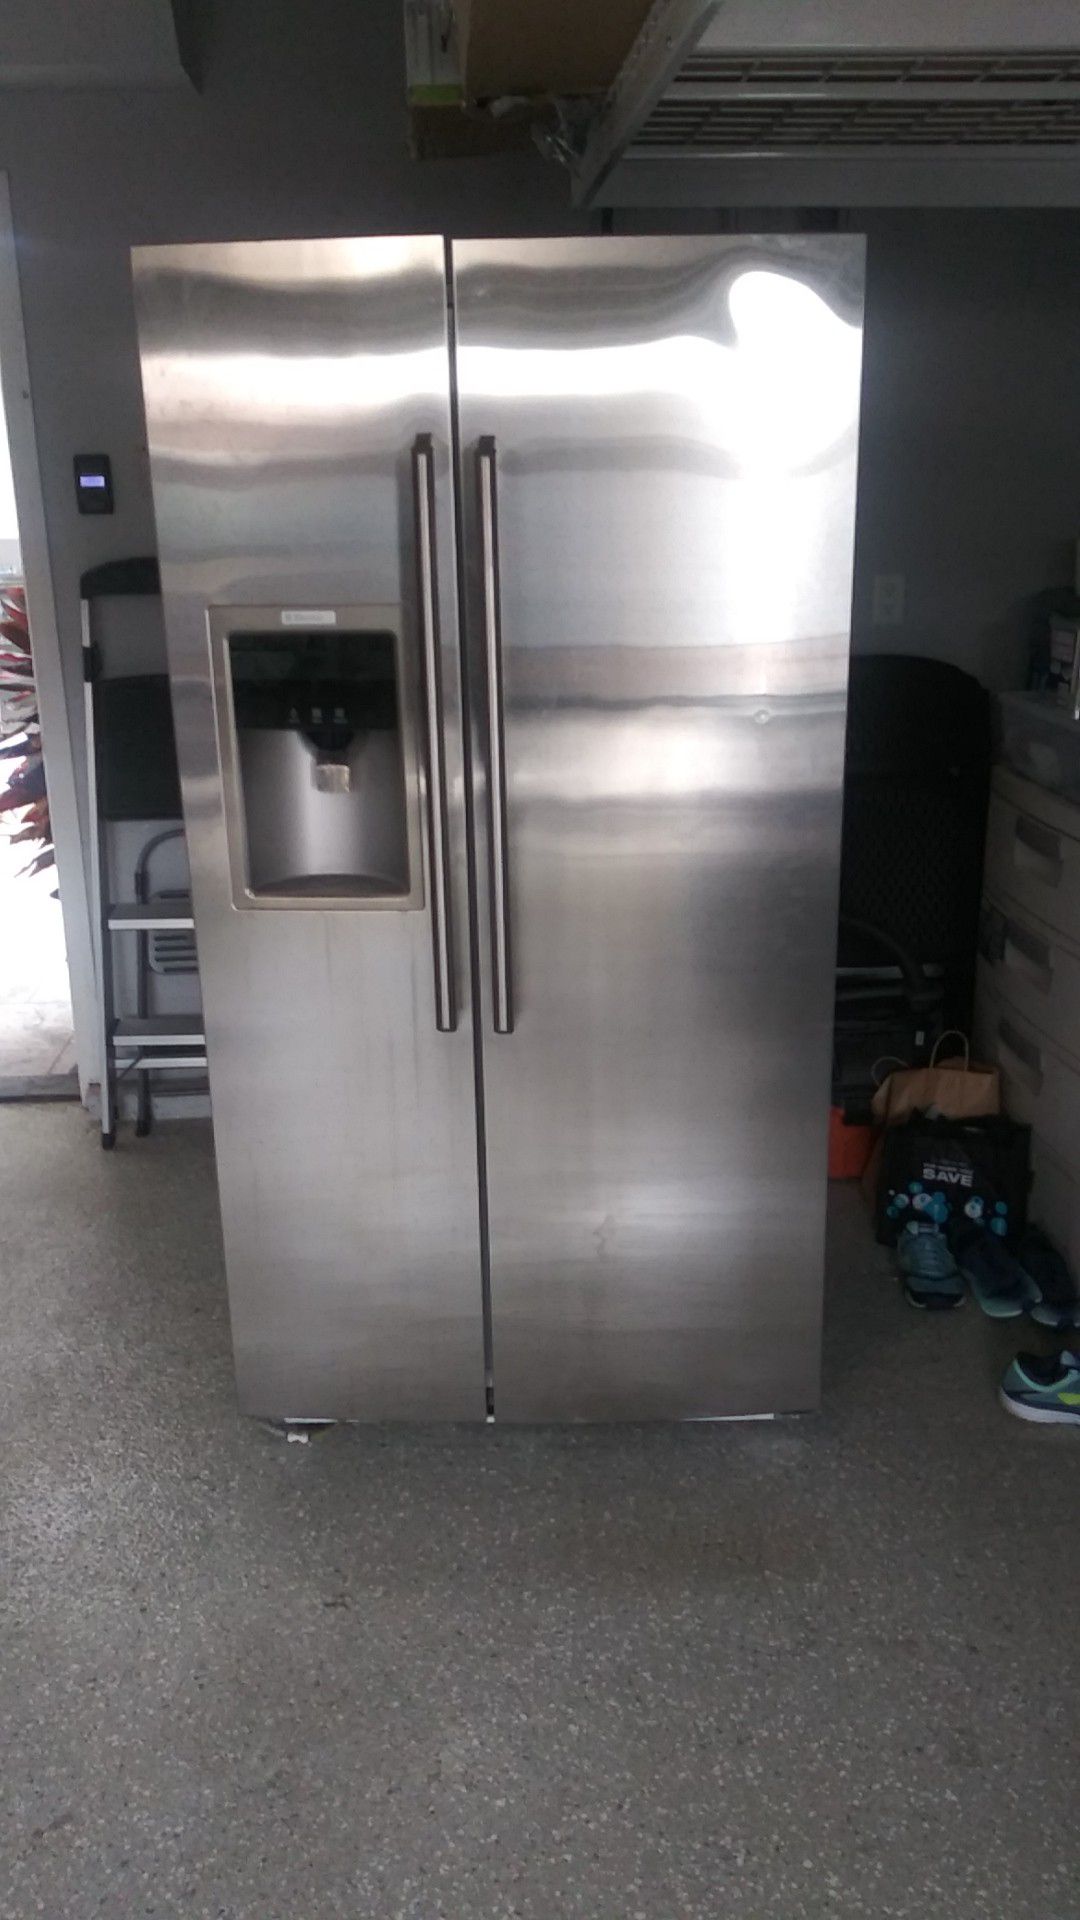 Refrigerator in good conditions, $150